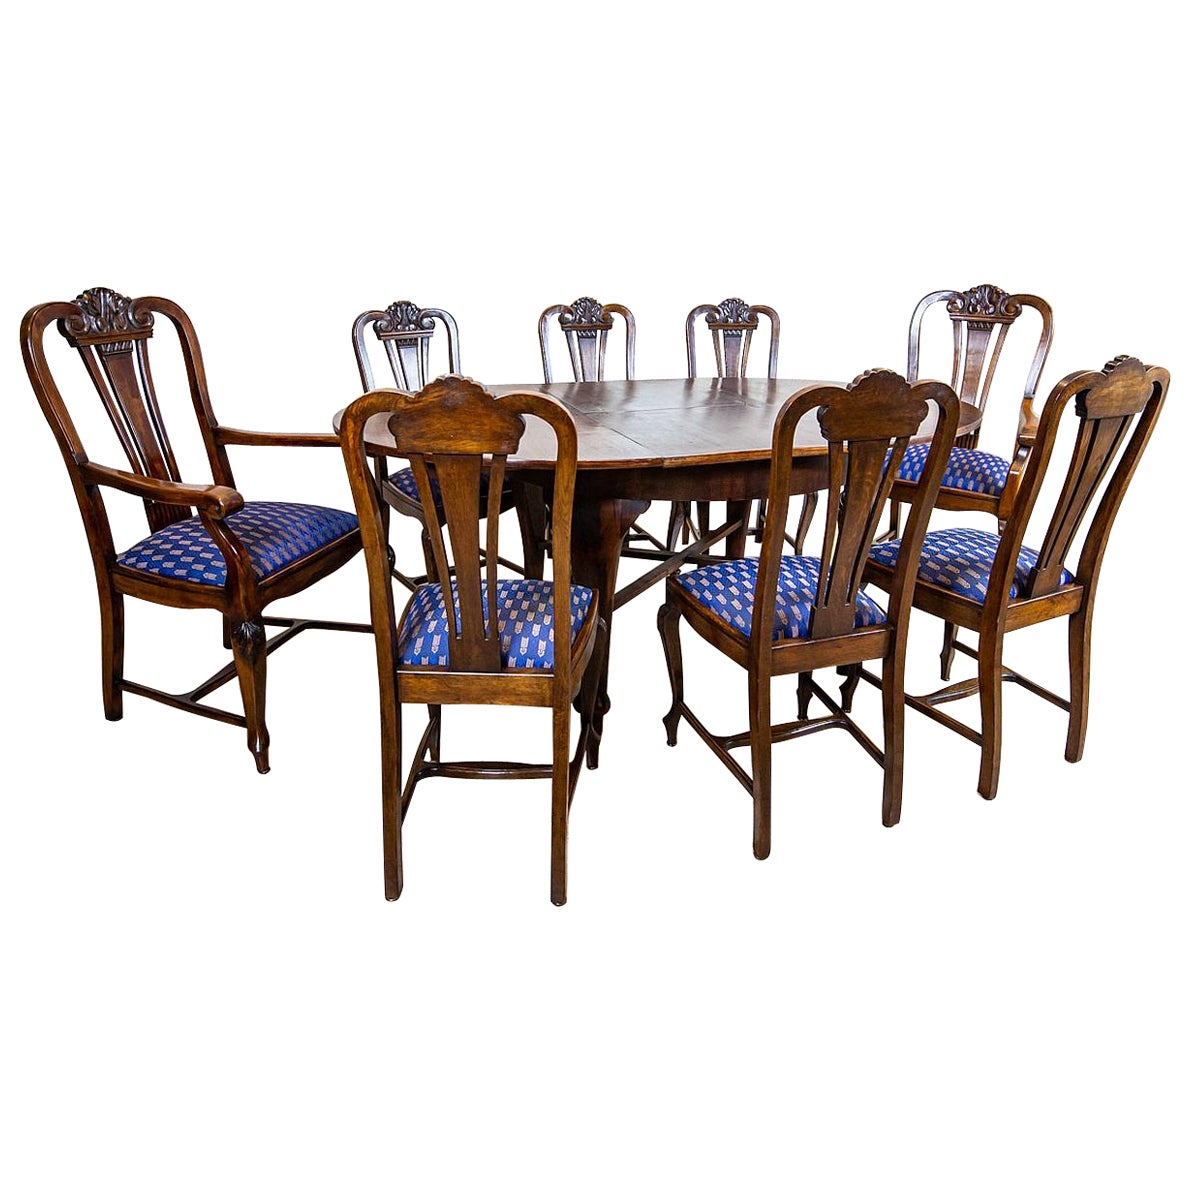 Oak & Walnut Dining Room Set From the Interwar Period in Blue Upholstery For Sale